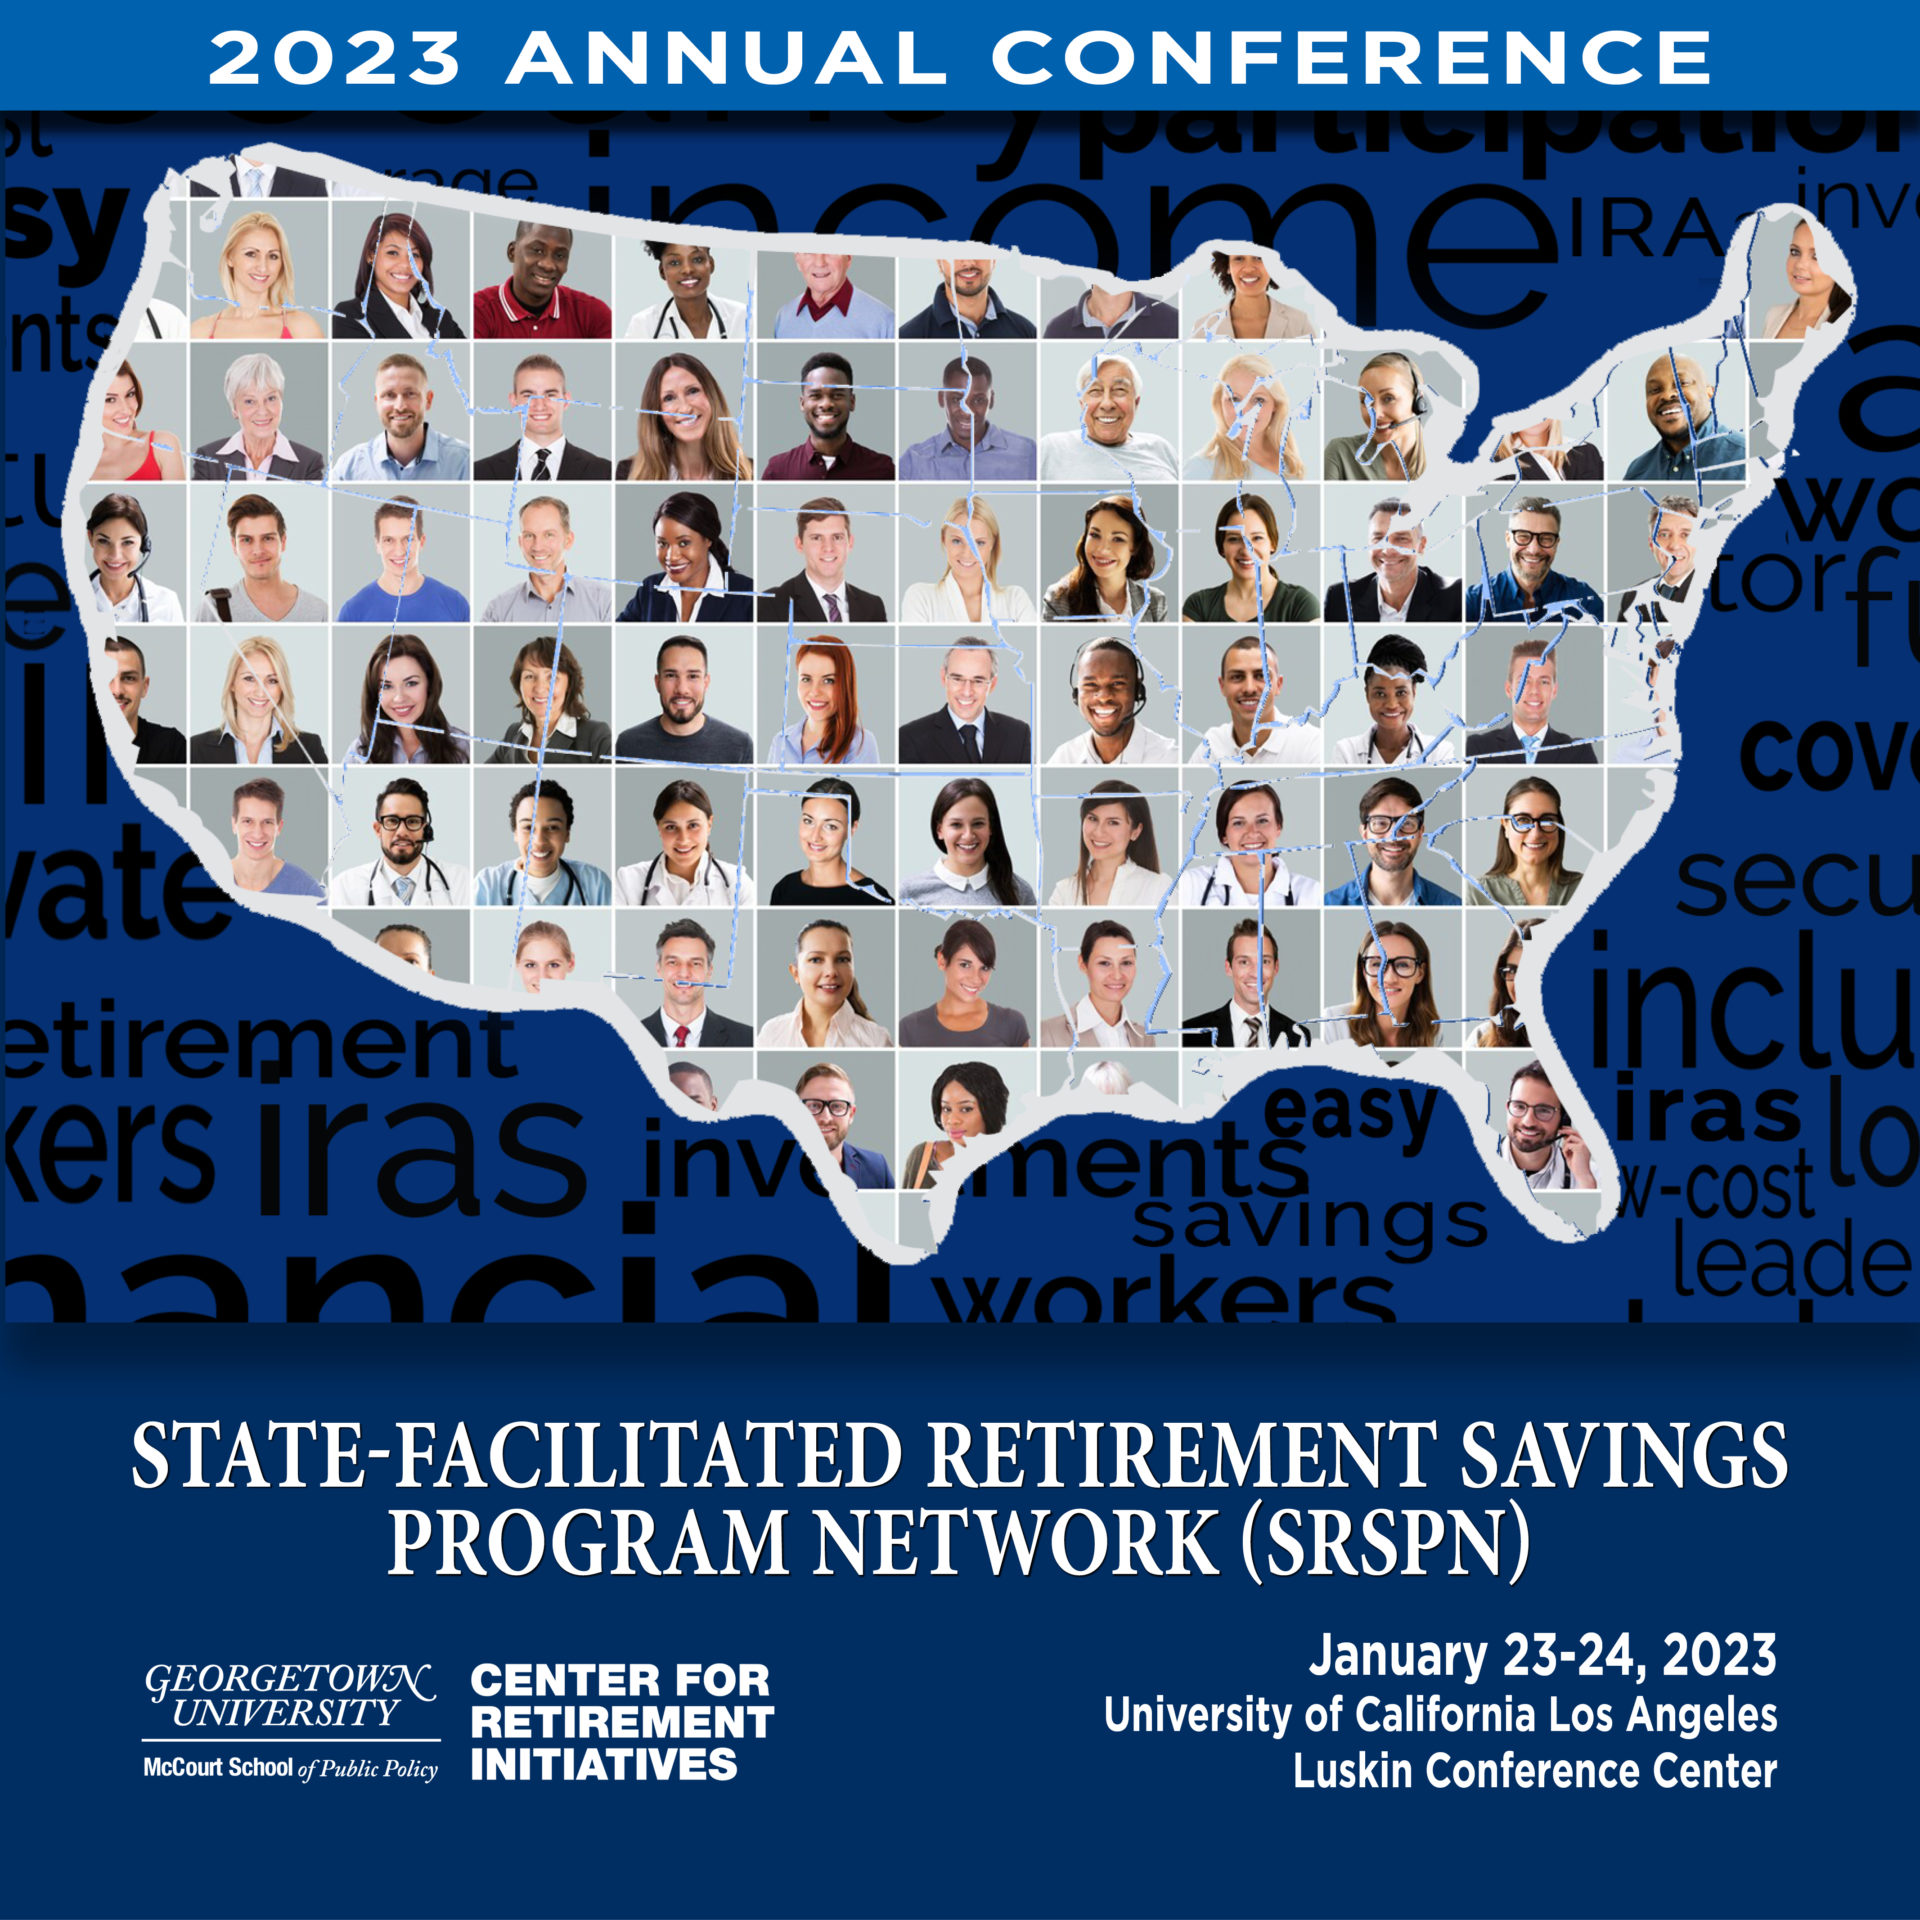 2023 States Meeting Banner Square 1024x1024 1 1920x1920 